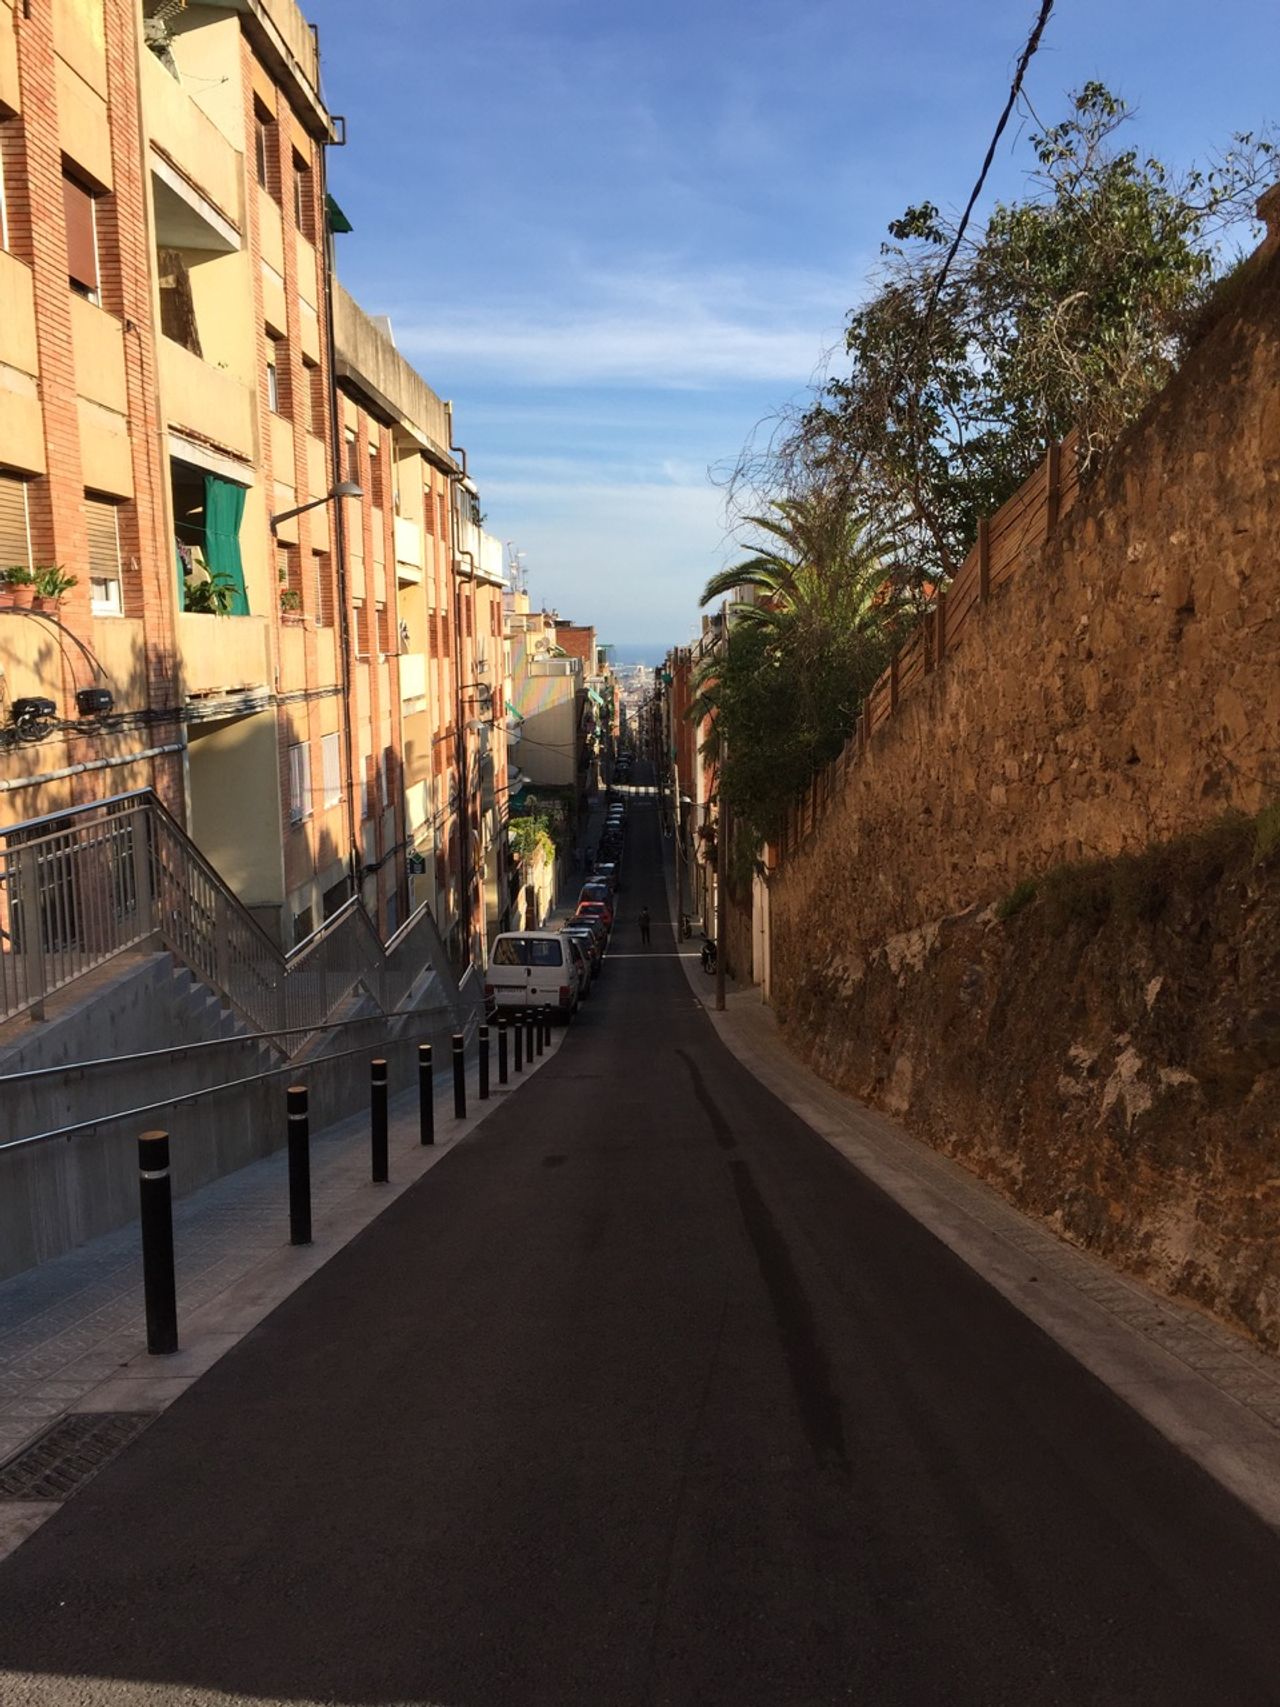 A steep downhill road in the city.